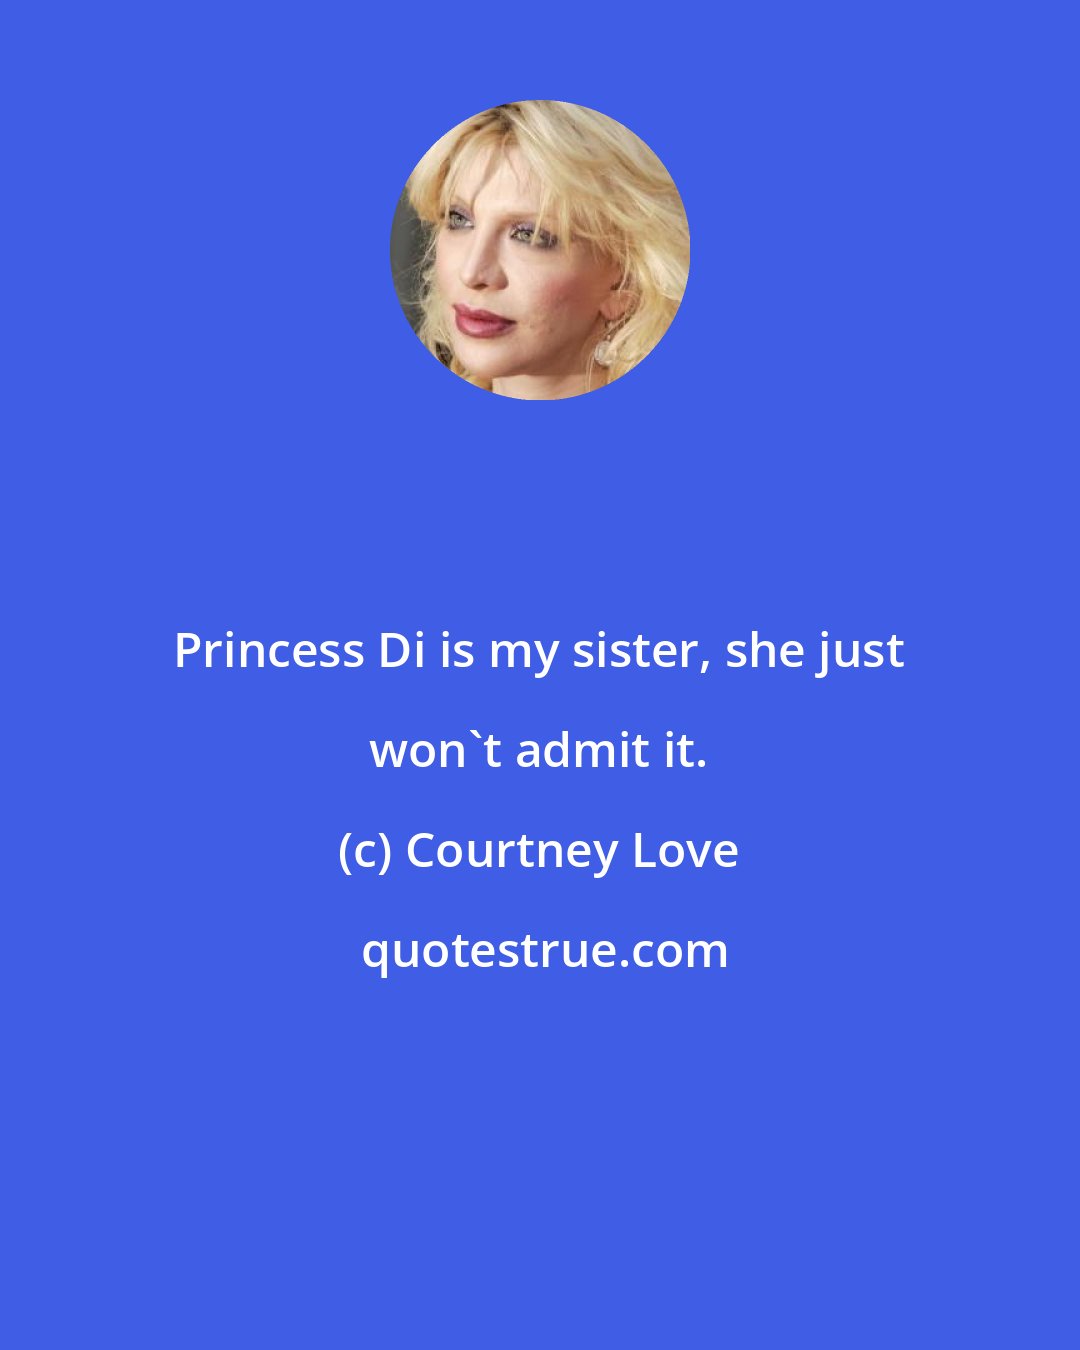 Courtney Love: Princess Di is my sister, she just won't admit it.